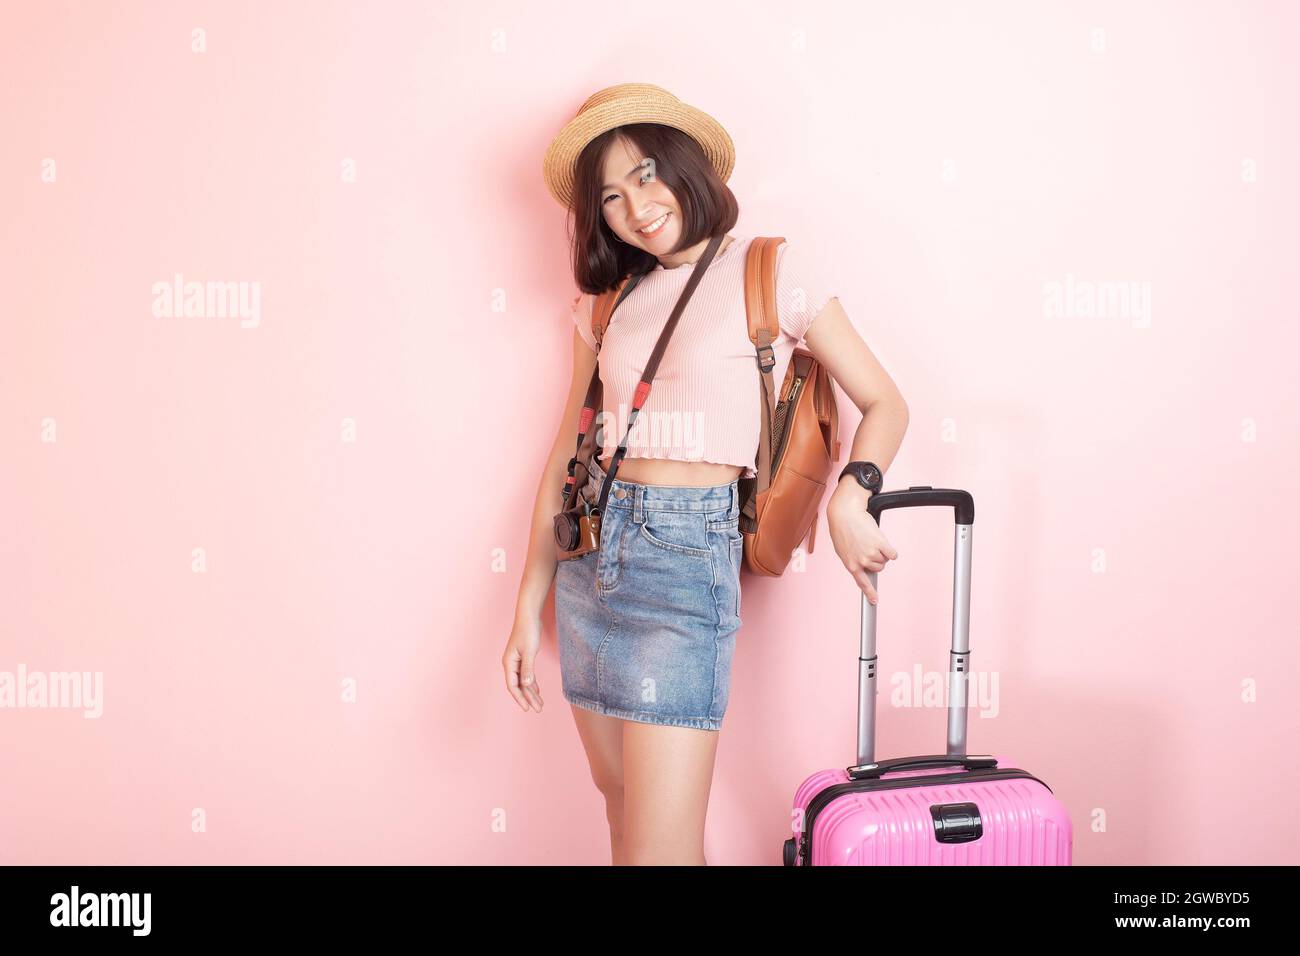 Portrait Of Woman Standing With Suitcase Against Wall Stock Photo